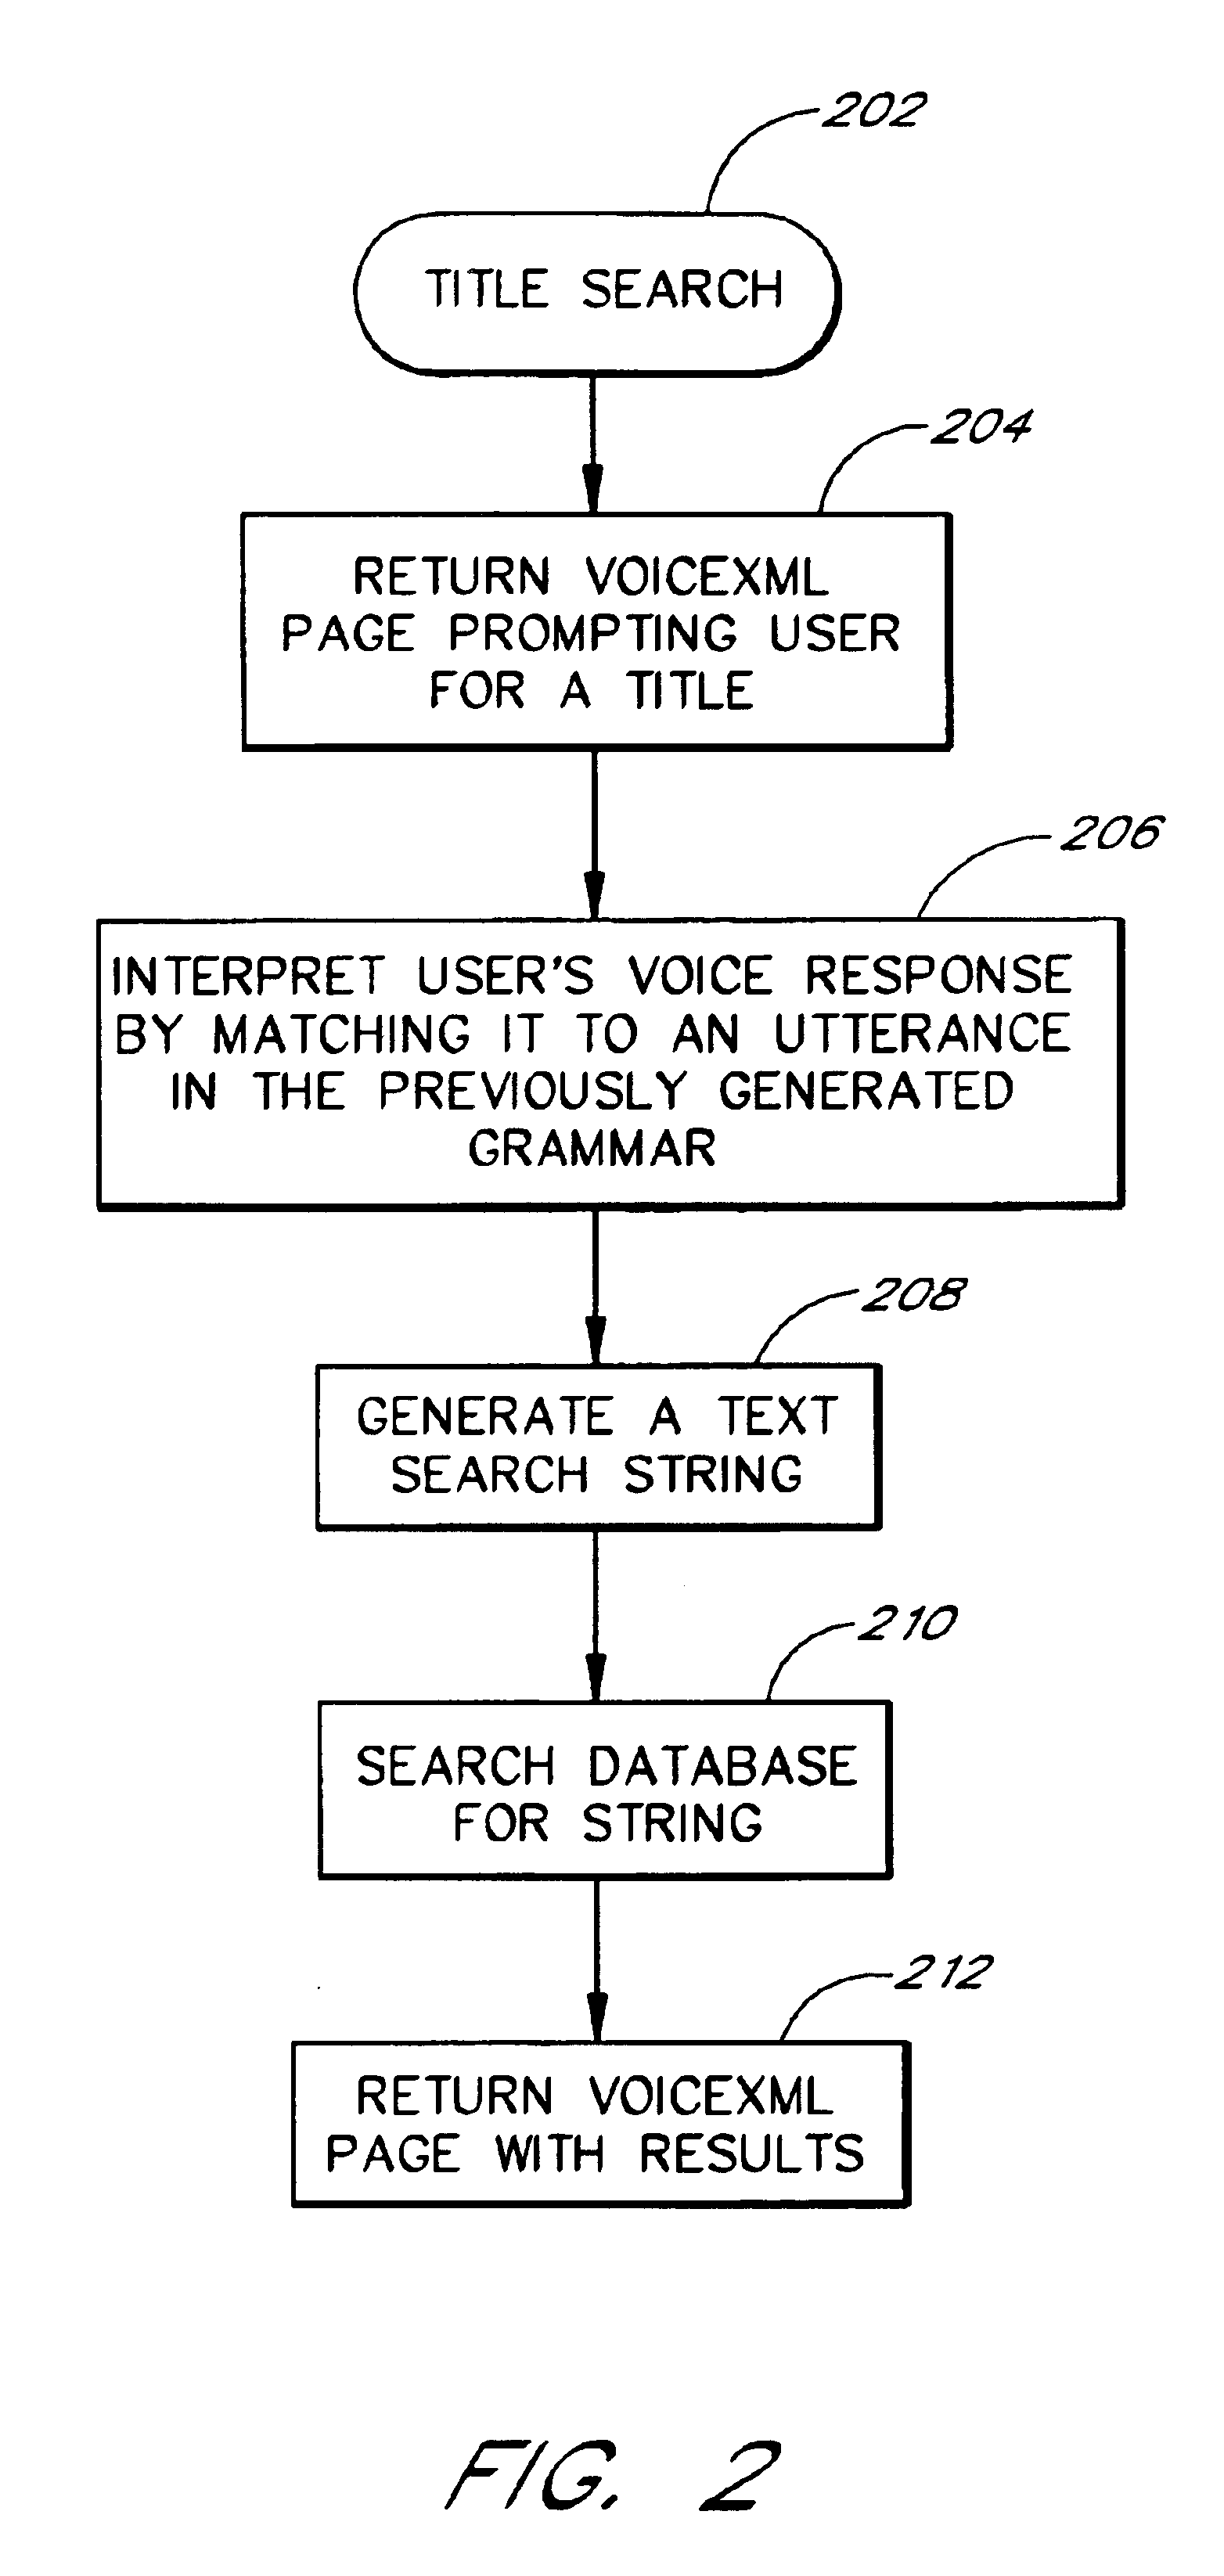 Grammar generation for voice-based searches